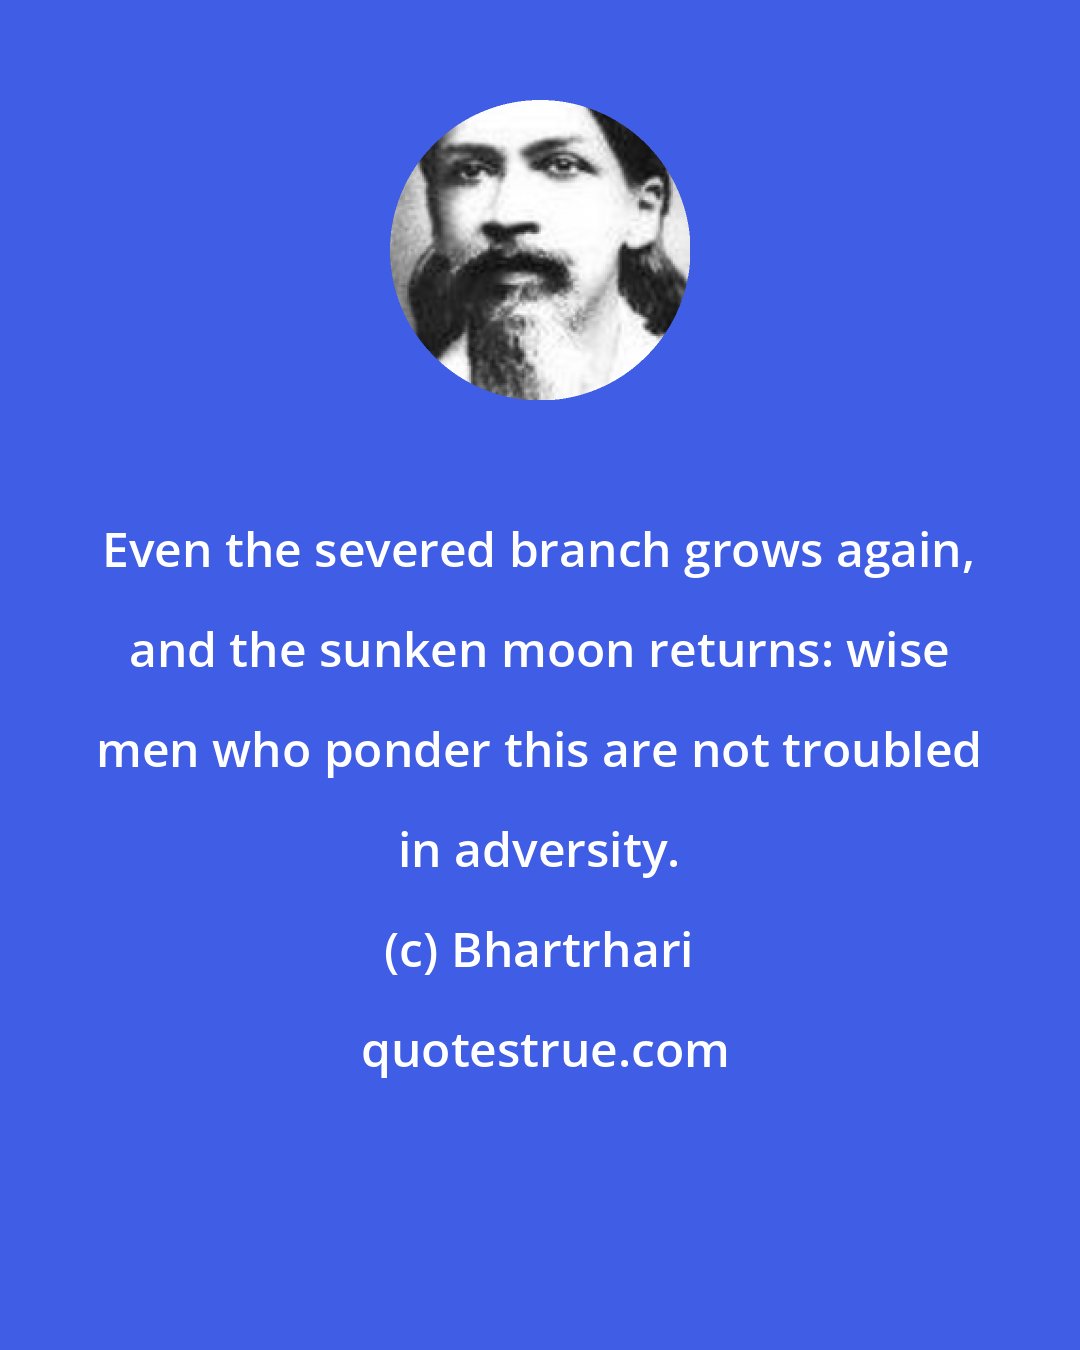 Bhartrhari: Even the severed branch grows again, and the sunken moon returns: wise men who ponder this are not troubled in adversity.